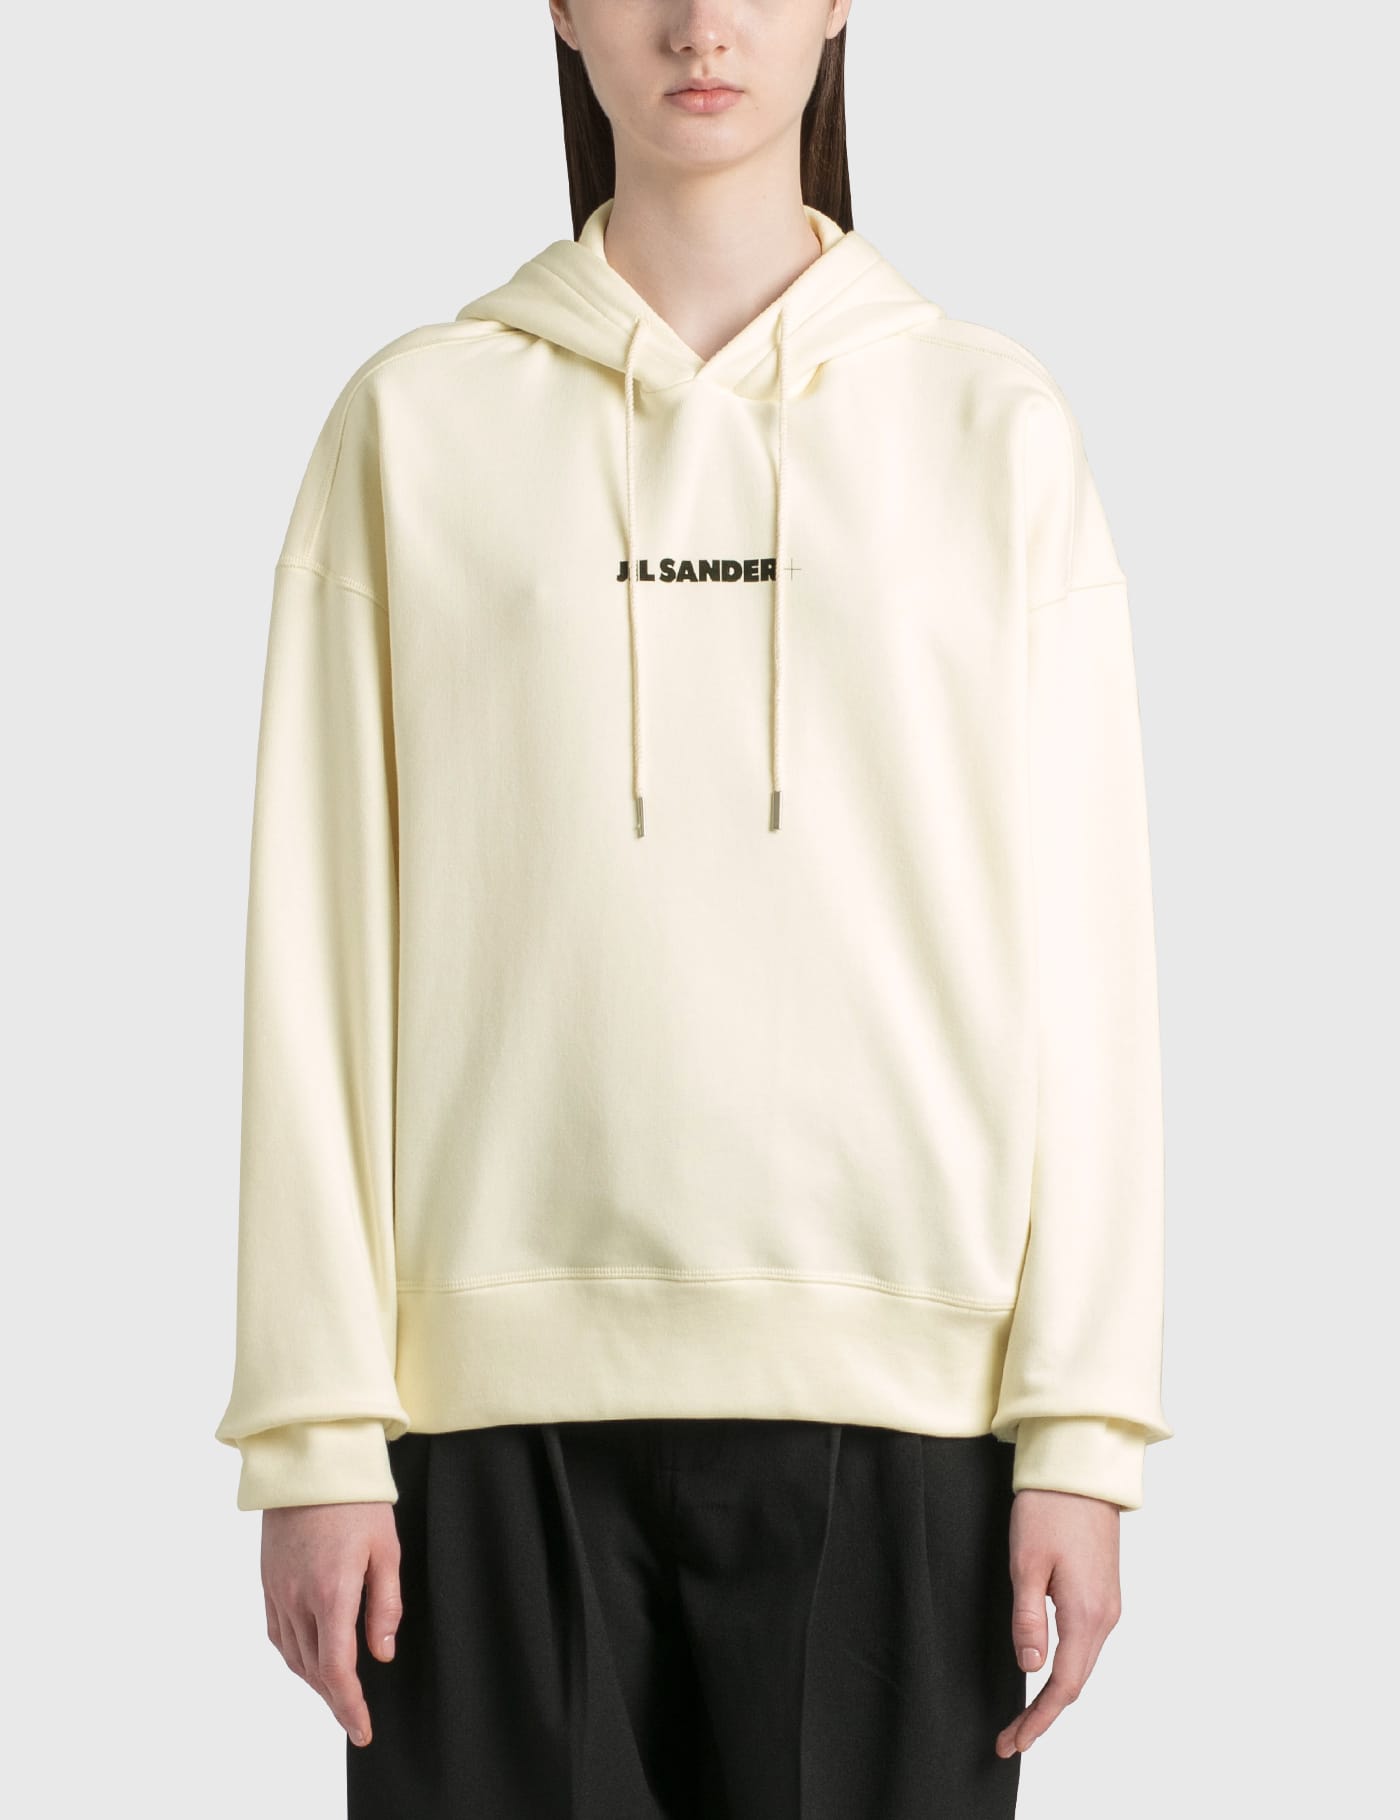 Jil Sander - Jil Sander+ Logo Hoodie | HBX - Globally Curated Fashion and  Lifestyle by Hypebeast